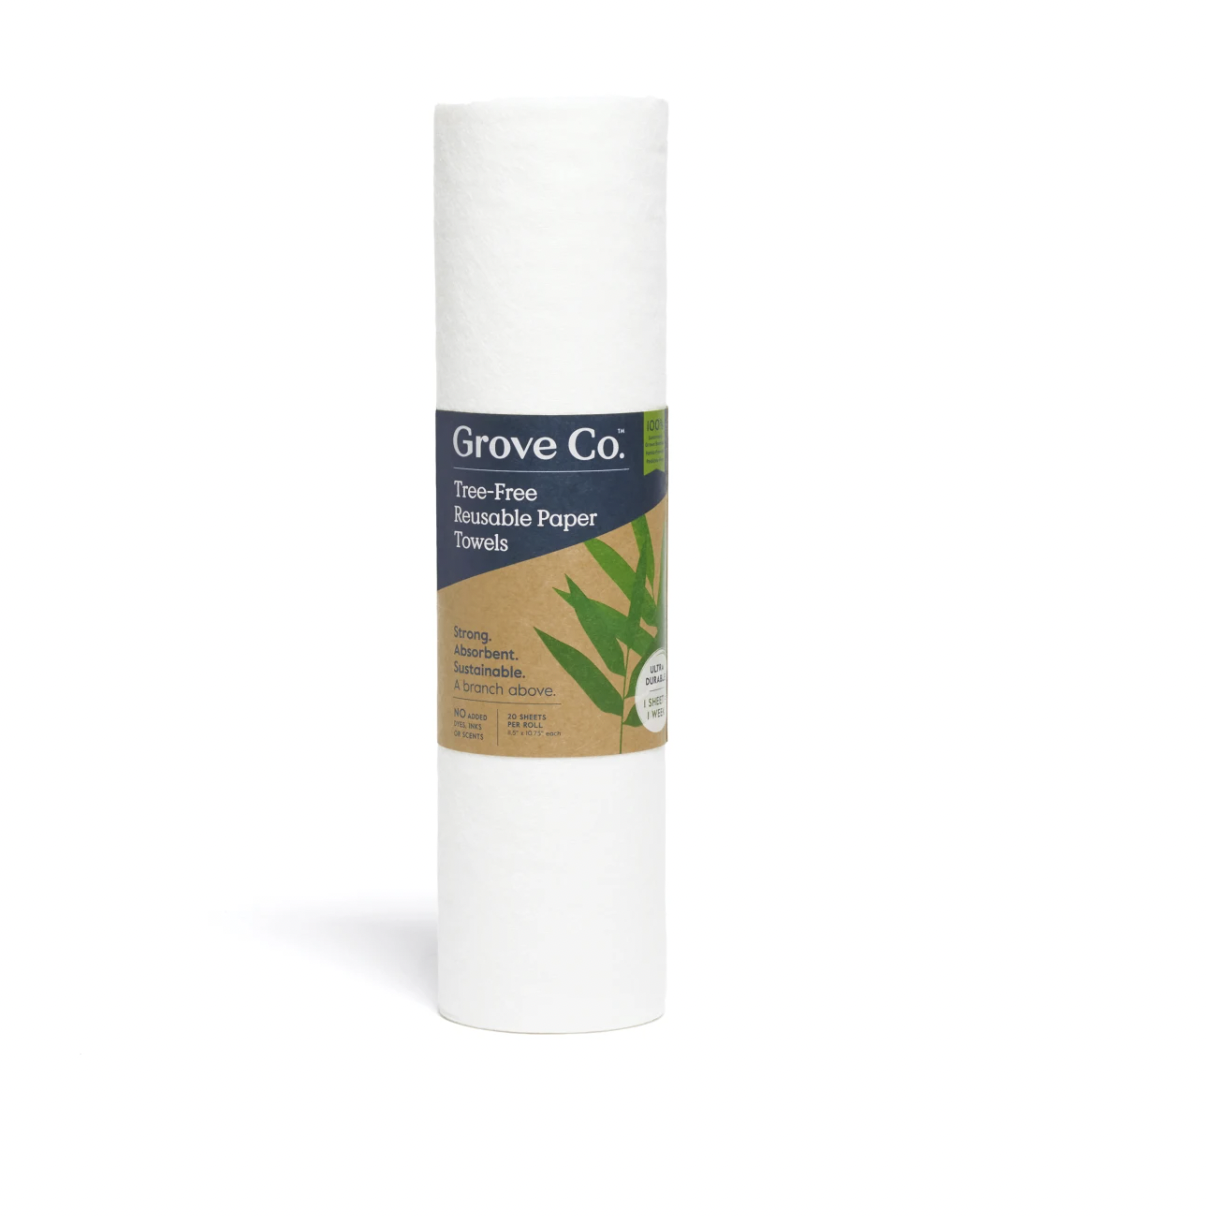 Tree Free Paper Towels | Grove Collaborative